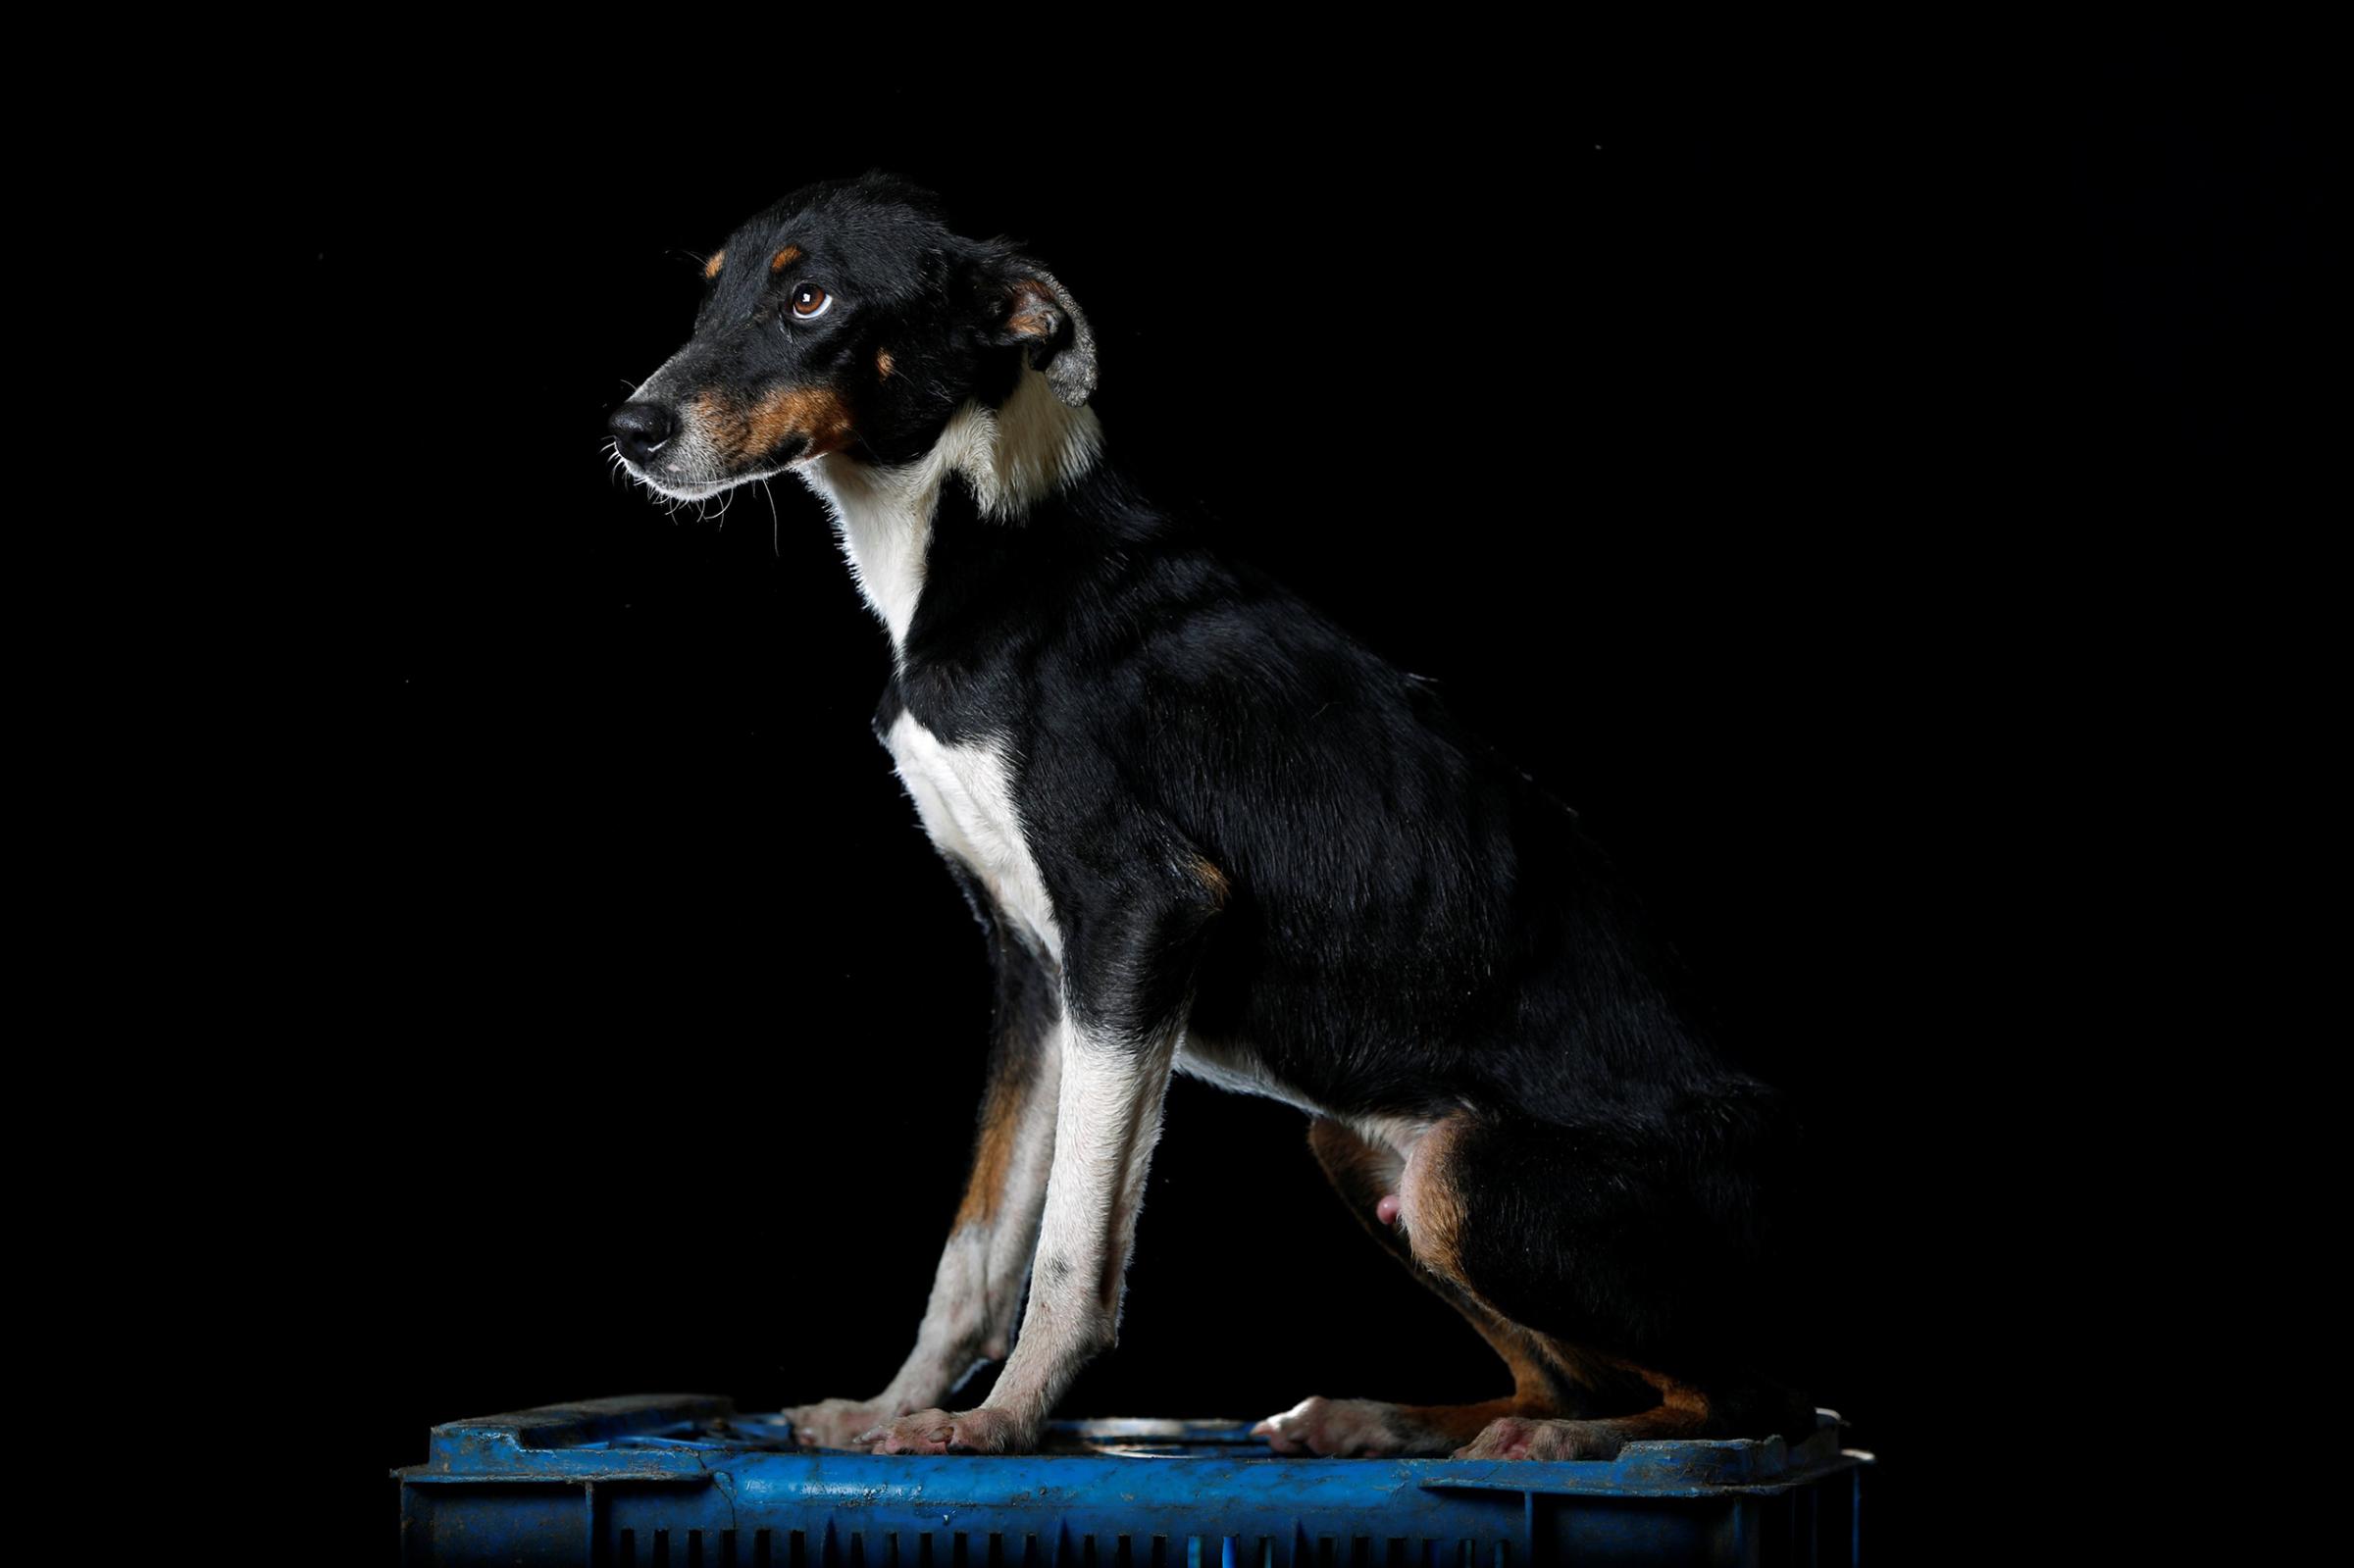 Lucho is pictured at the Famproa dogs shelter in Los Teques, Venezuela Aug. 16, 2016. "Someone left him with his three brothers in a cardboard box outside the shelter a year and a half ago. Two of them died and one was adopted by a family. He is a favorite at the shelter but he is an escape artist, he has the ability to get out of anywhere," said Maria Silva who takes care of dogs at the shelter.